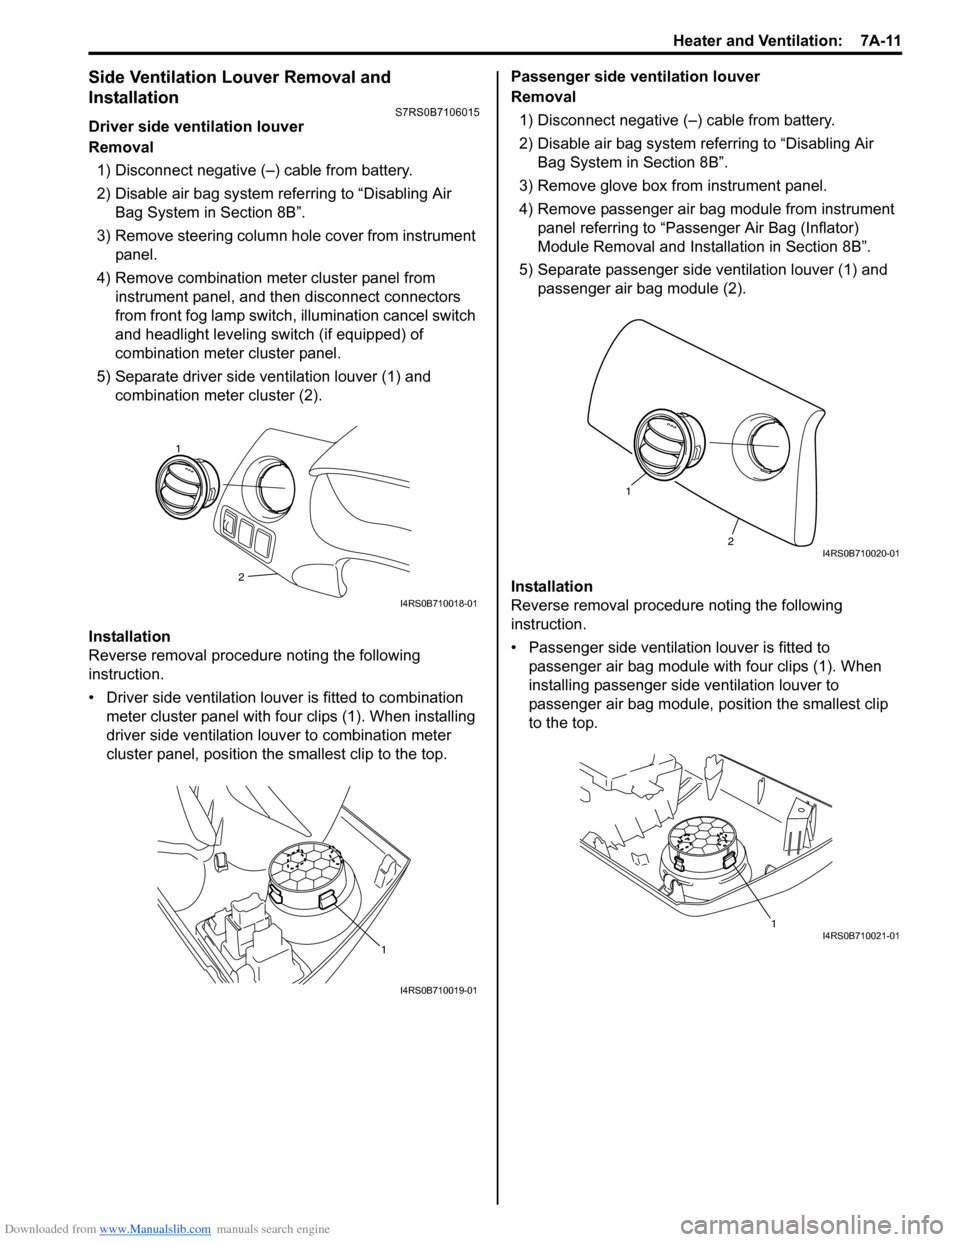 SUZUKI SWIFT 2006 2.G Service Workshop Manual Downloaded from www.Manualslib.com manuals search engine Heater and Ventilation:  7A-11
Side Ventilation Louver Removal and 
Installation
S7RS0B7106015
Driver side ventilation louver
Removal1) Disconn